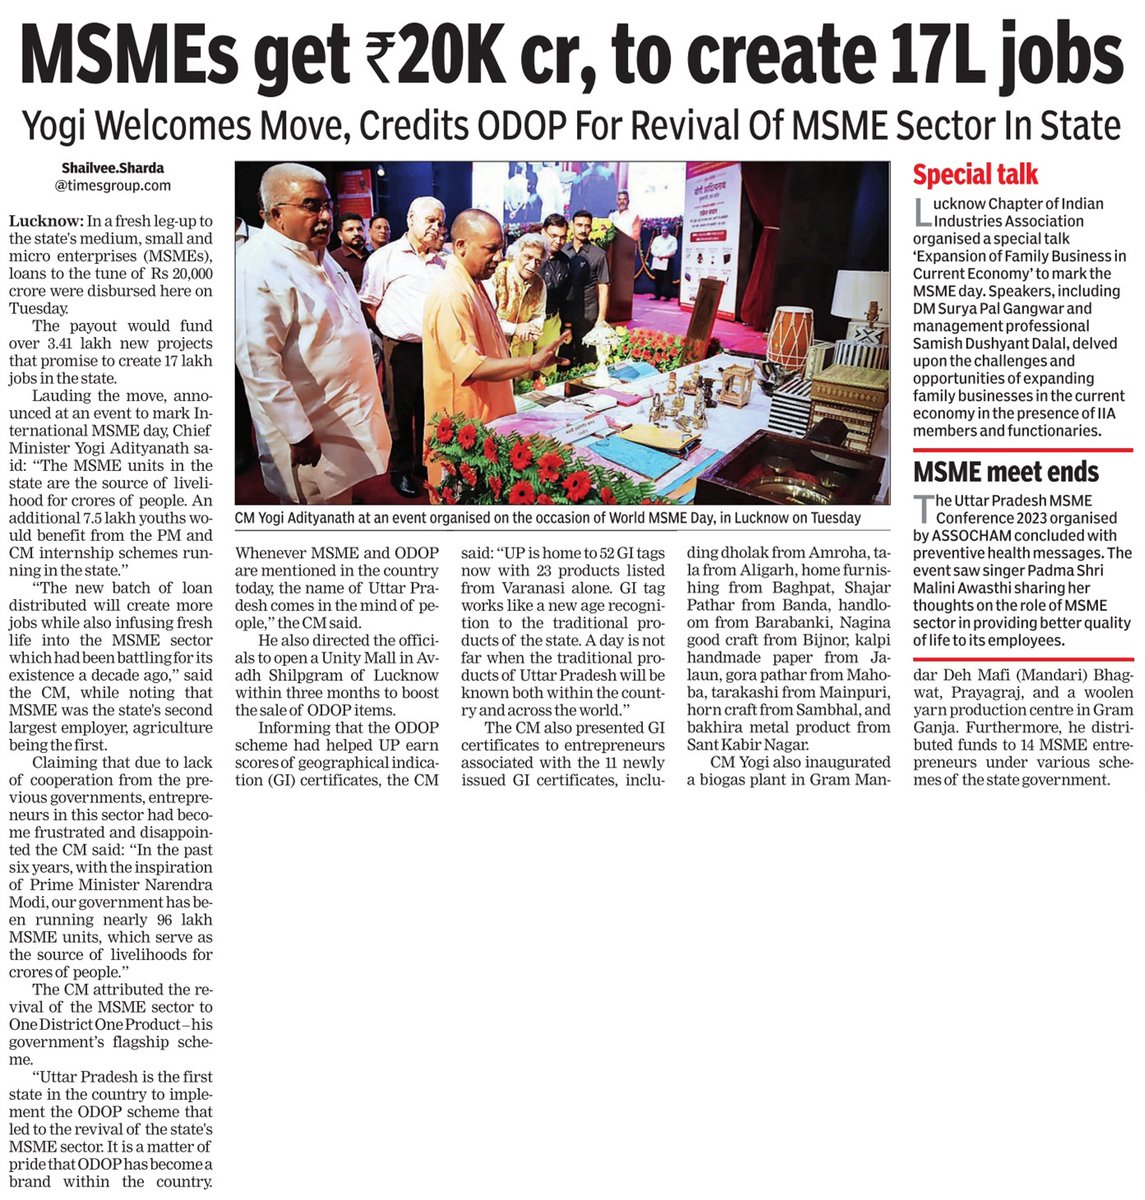 MSMEs get ₹20K crore, to create 17L jobs

#UPCM @myogiadityanath Welcomes Move, Credits ODOP For Revival of MSME Sector in State